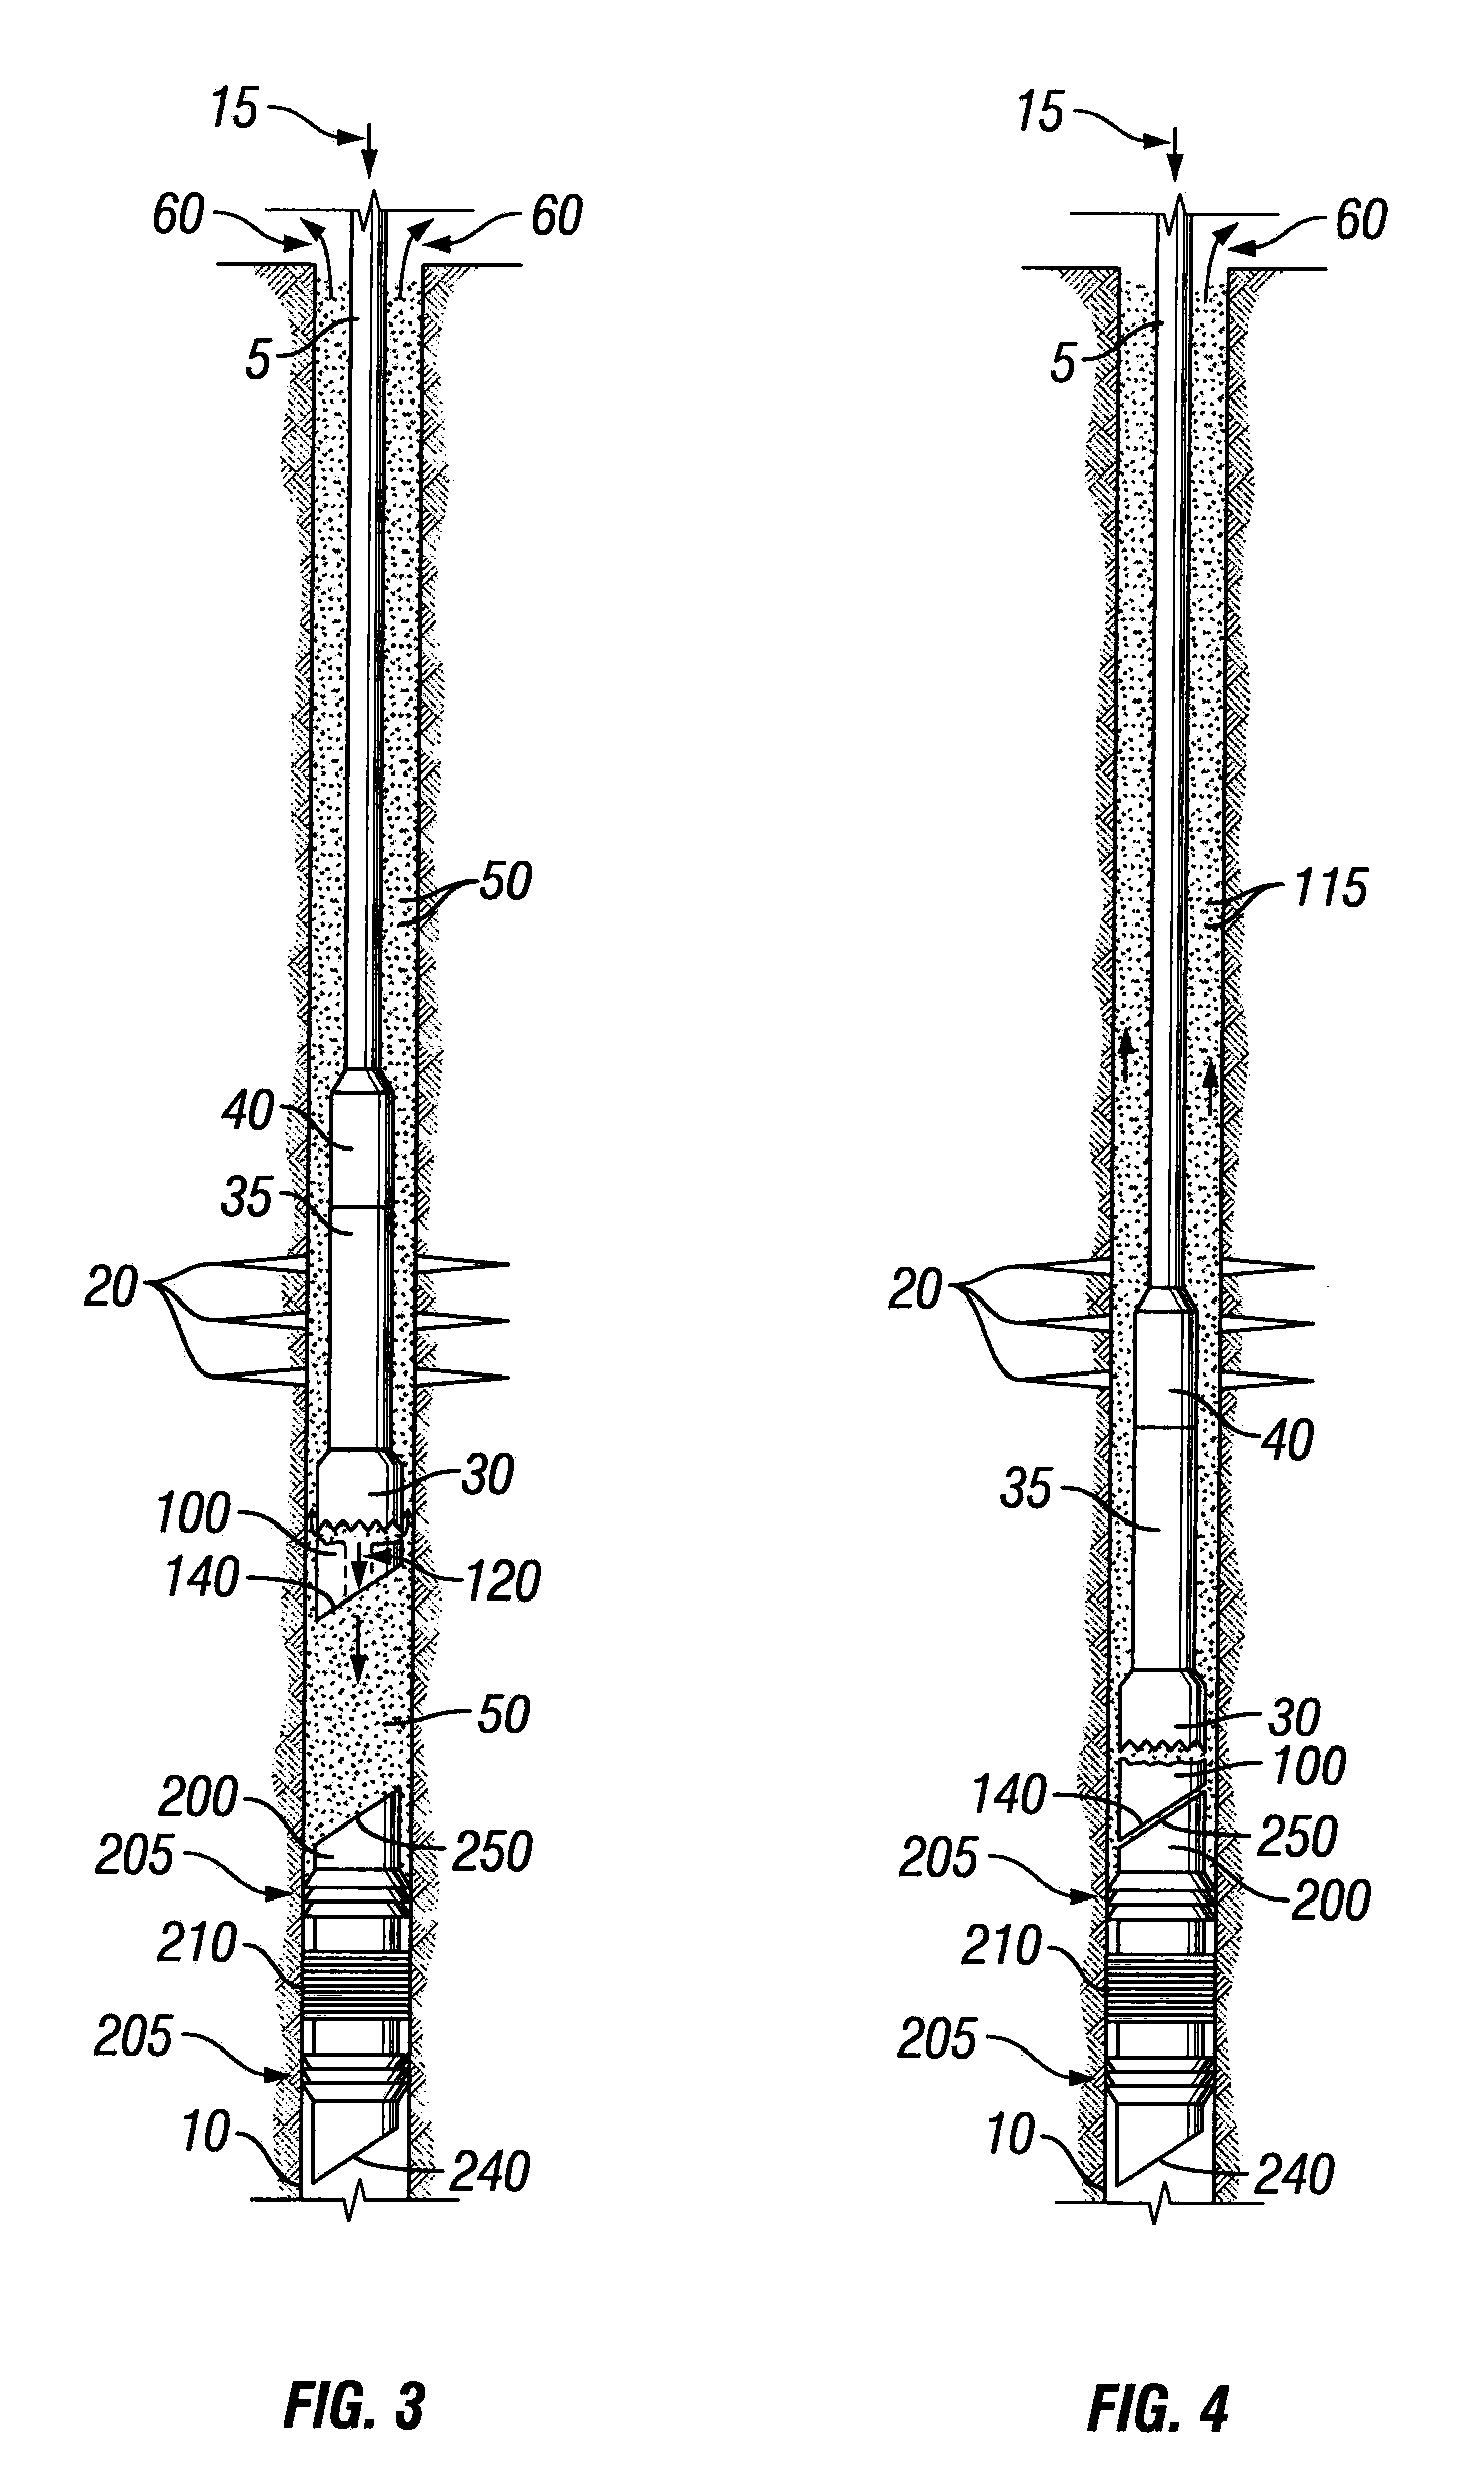 Mill and method for drilling composite bridge plugs